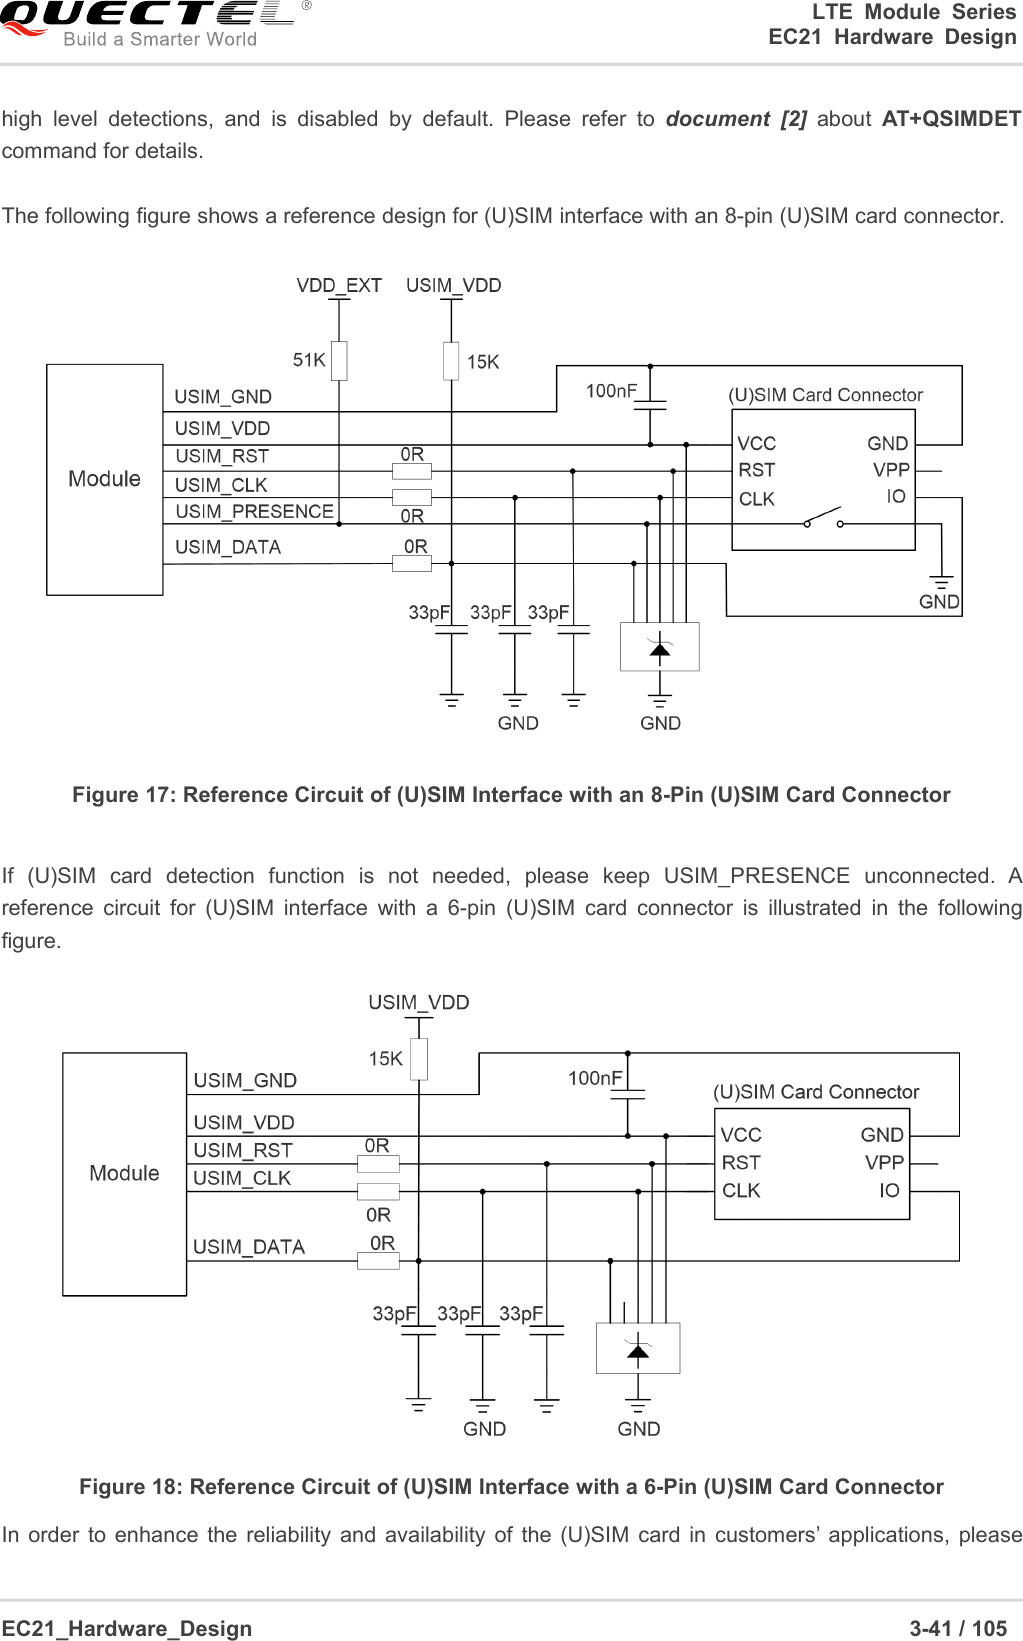 LTE Module SeriesEC21 Hardware DesignEC21_Hardware_Design 3-41 / 105high level detections, and is disabled by default. Please refer to document [2] about AT+QSIMDETcommand for details.The following figure shows a reference design for (U)SIM interface with an 8-pin (U)SIM card connector.Figure 17: Reference Circuit of (U)SIM Interface with an 8-Pin (U)SIM Card ConnectorIf (U)SIM card detection function is not needed, please keep USIM_PRESENCE unconnected. Areference circuit for (U)SIM interface with a 6-pin (U)SIM card connector is illustrated in the followingfigure.Figure 18: Reference Circuit of (U)SIM Interface with a 6-Pin (U)SIM Card ConnectorIn order to enhance the reliability and availability of the (U)SIM card in customers’ applications, please